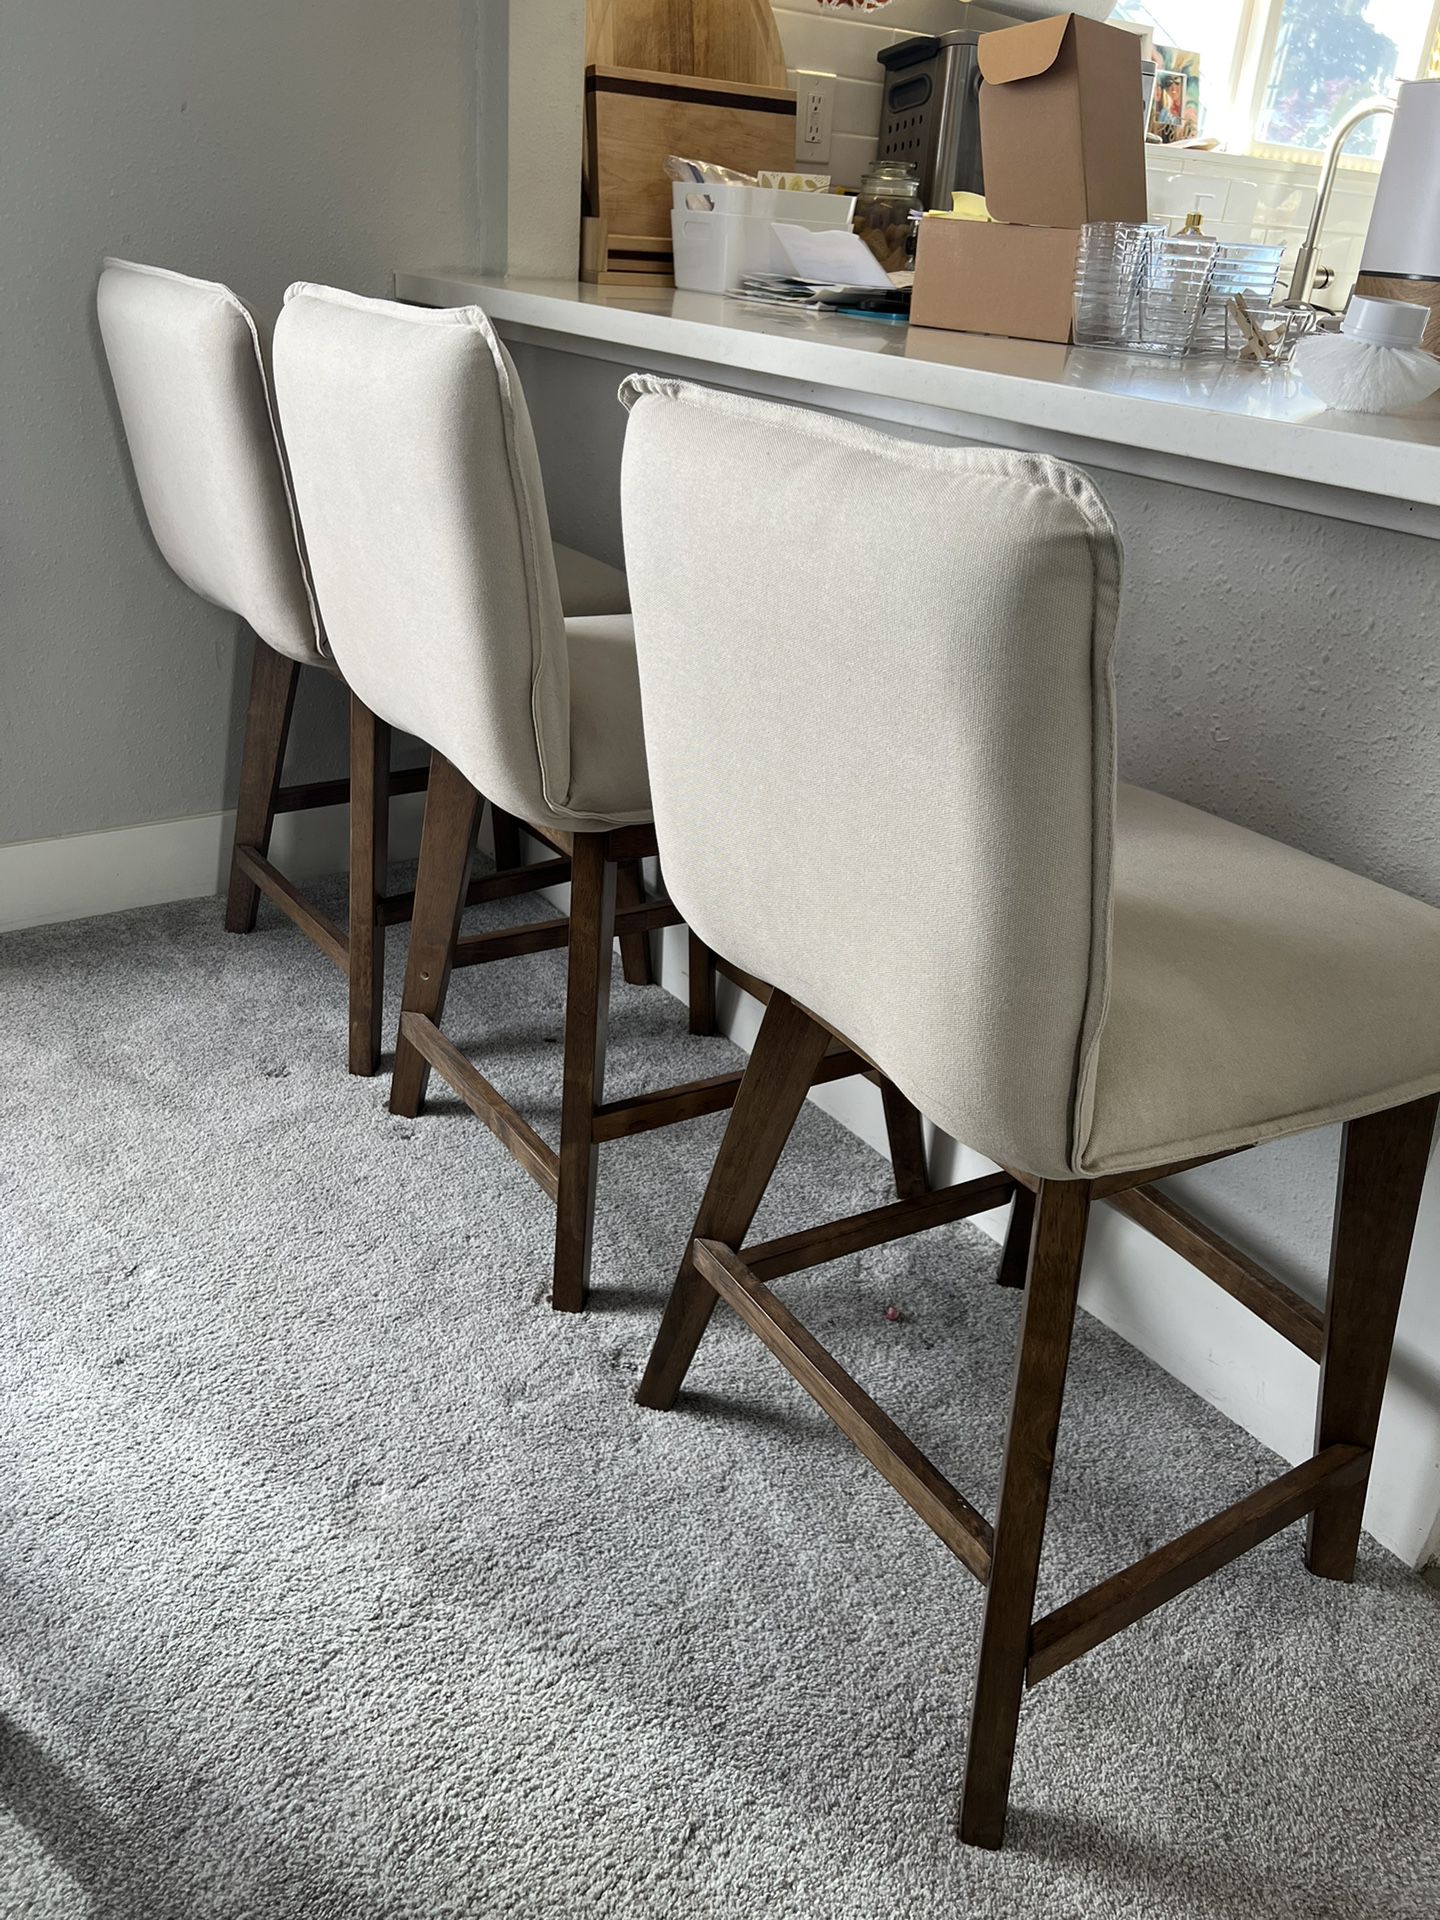 3 Counter Height  Padded Chairs